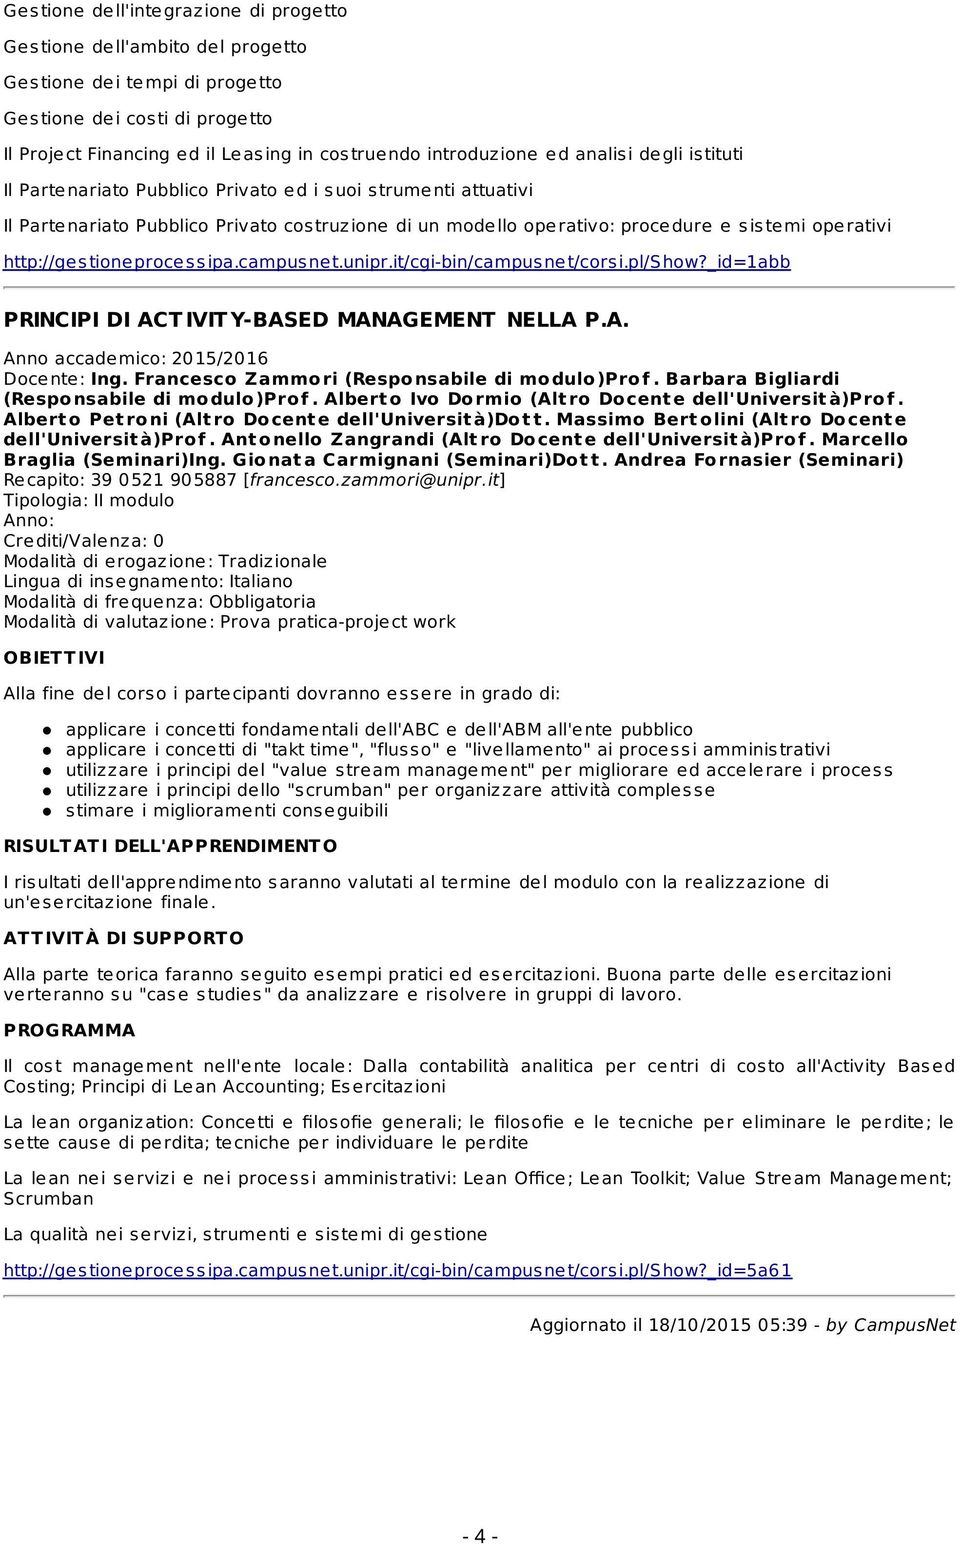 http://ges tioneproces s ipa.campus net.unipr.it/cgi-bin/campus net/cors i.pl/show?_id=1abb PRINCIPI DI ACT IVIT Y-BASED MANAGEMENT NELLA P.A. Docente: Ing.